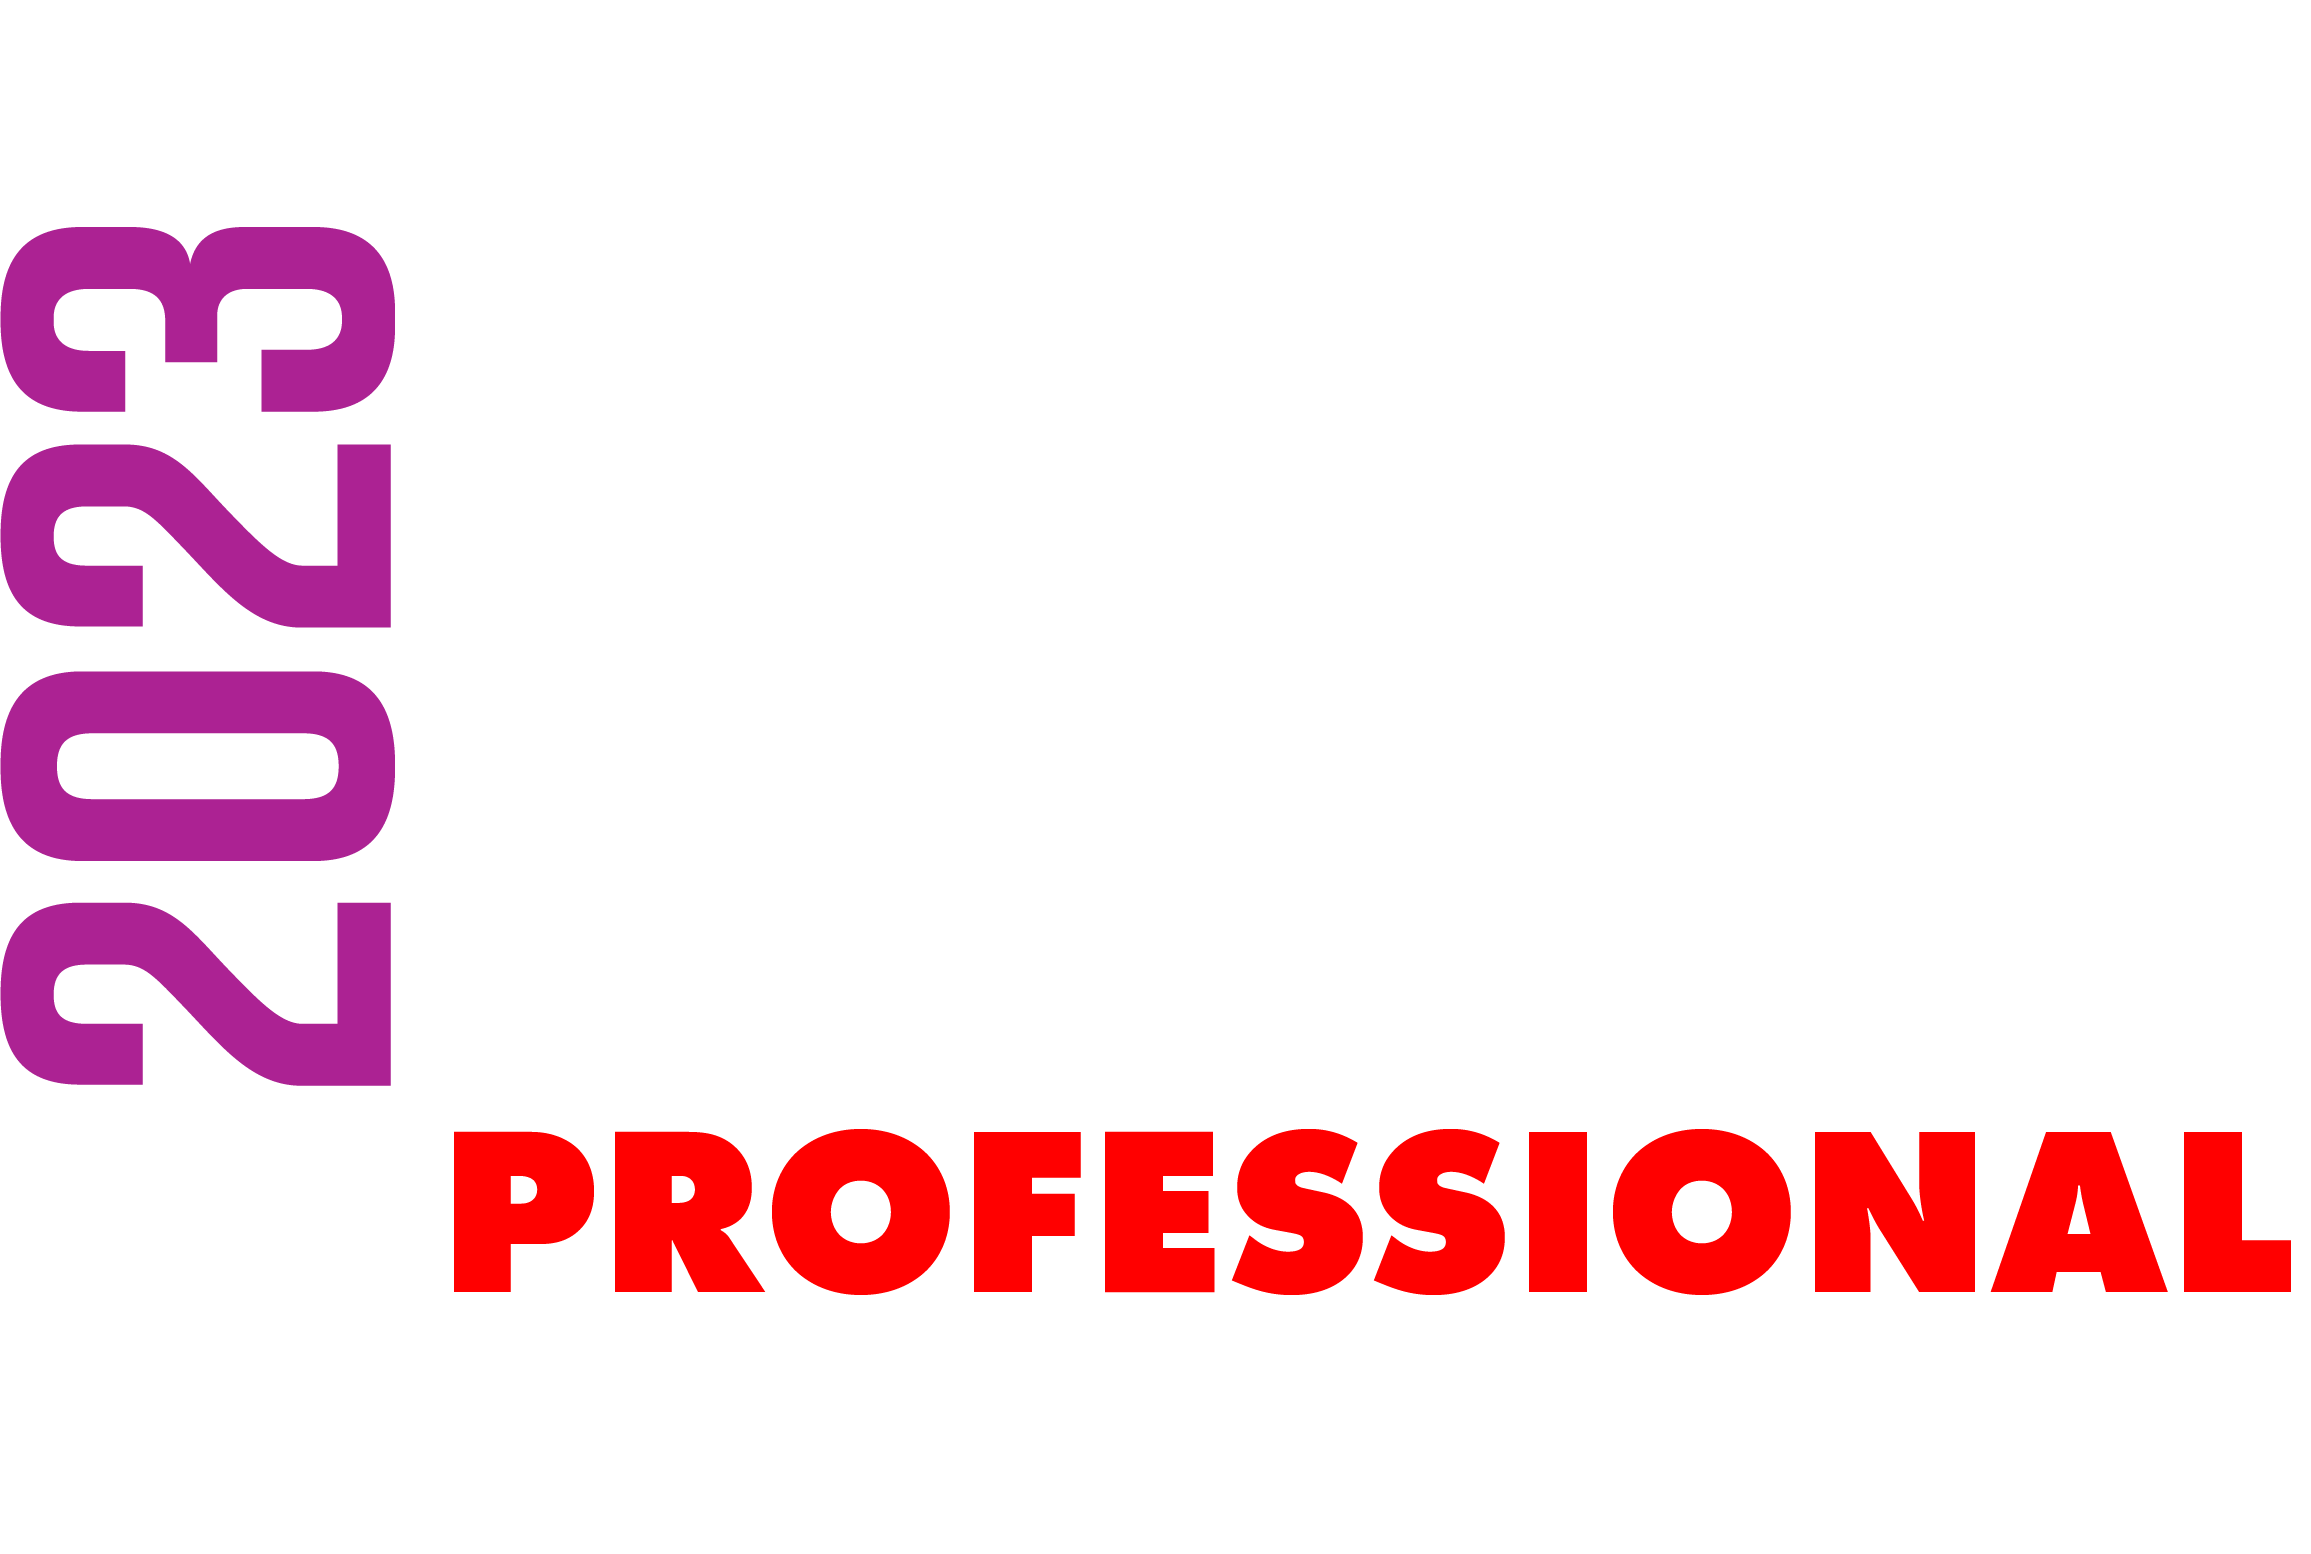 Enter the Scratch Professional Build Category 2023